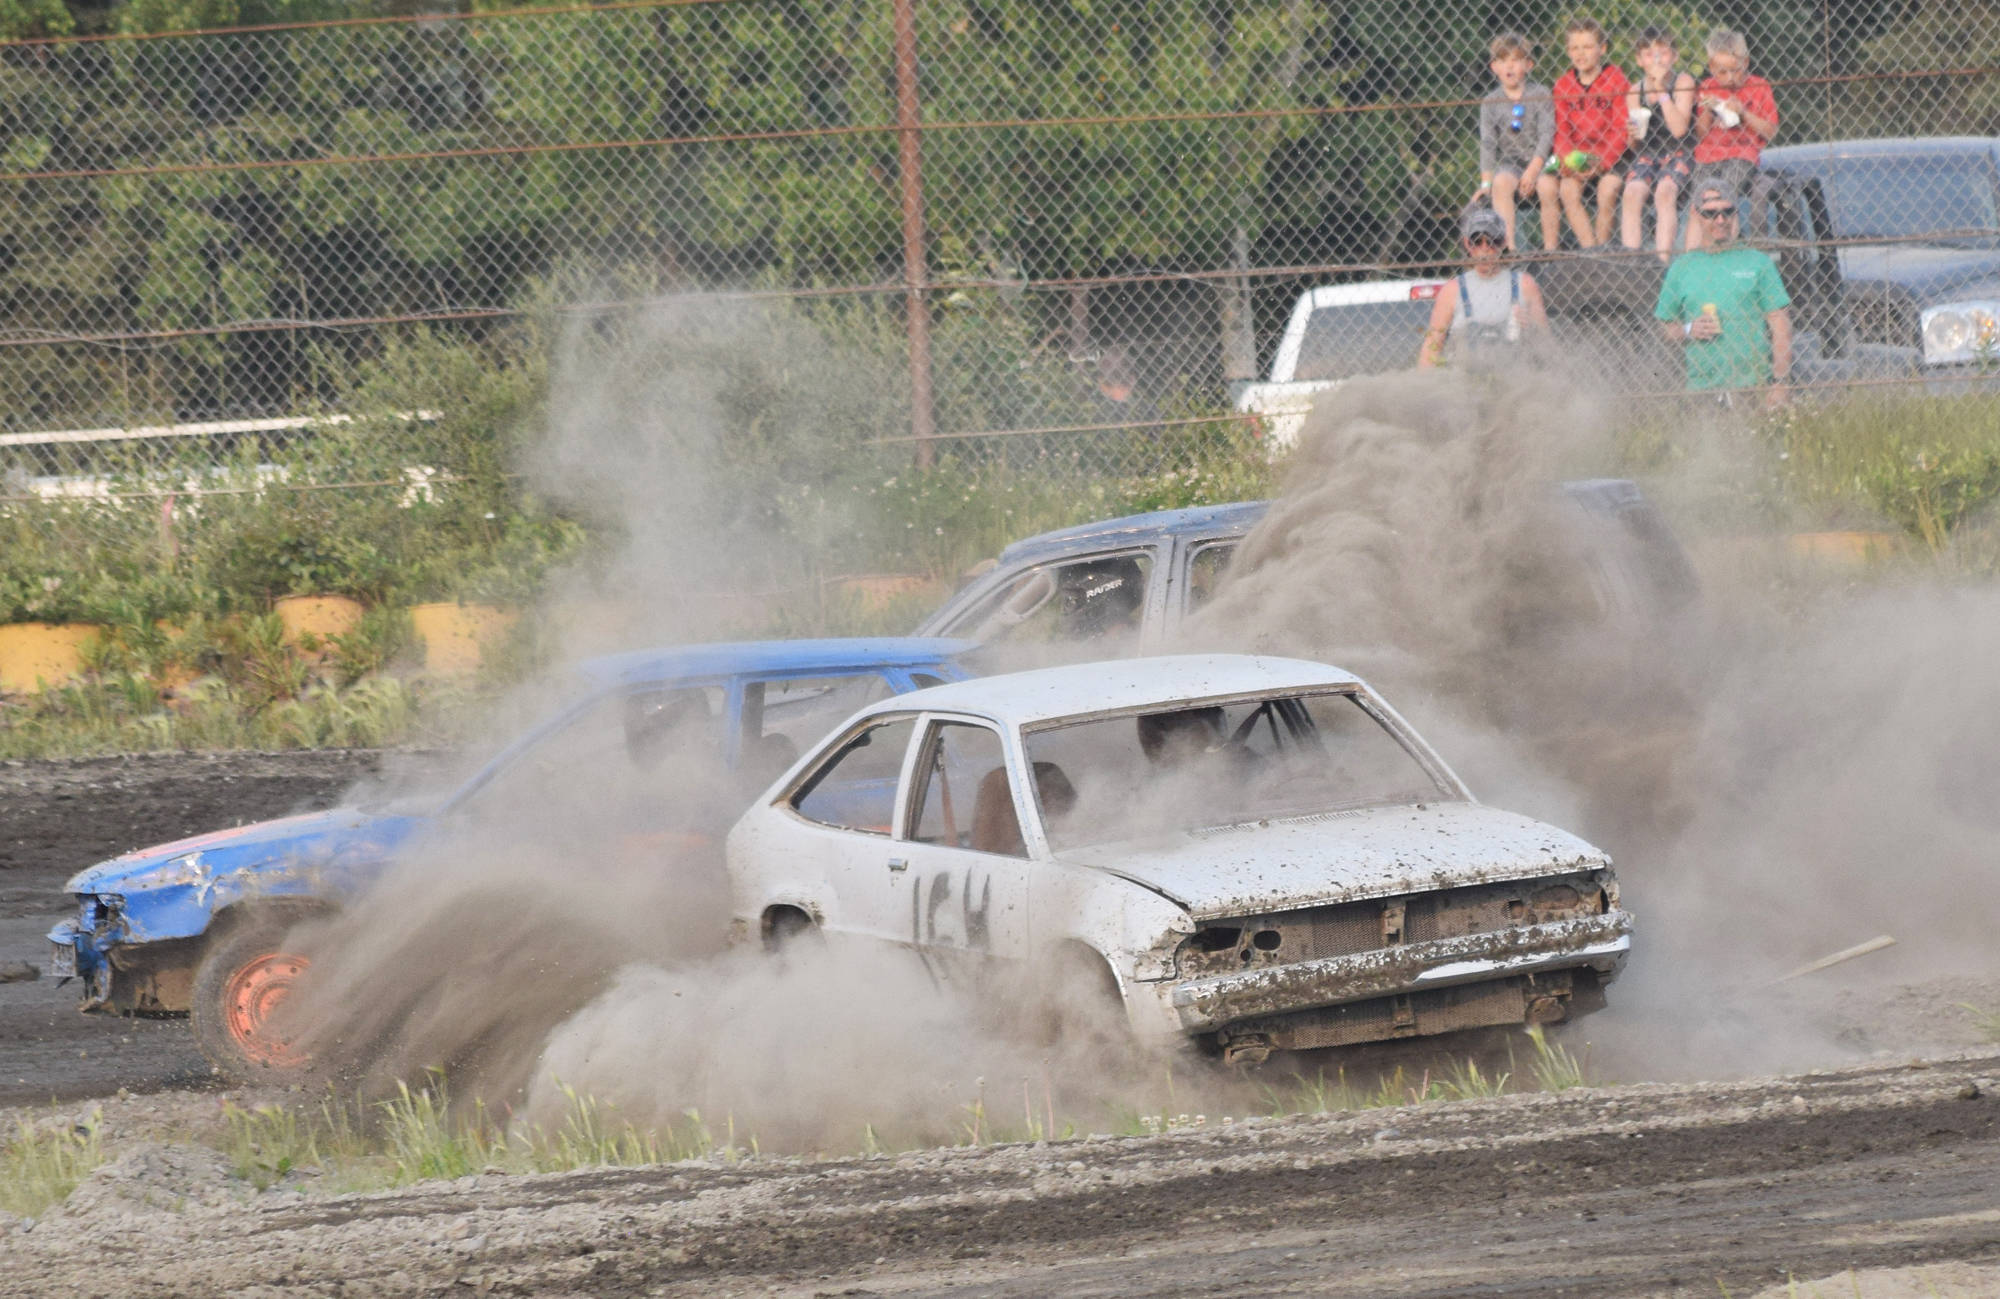 A driver spins out in the second Dollar Stock heat race Saturday, June 29, 2019, at Twin Cities Raceway in Kenai, Alaska. (Photo by Joey Klecka/Peninsula Clarion)